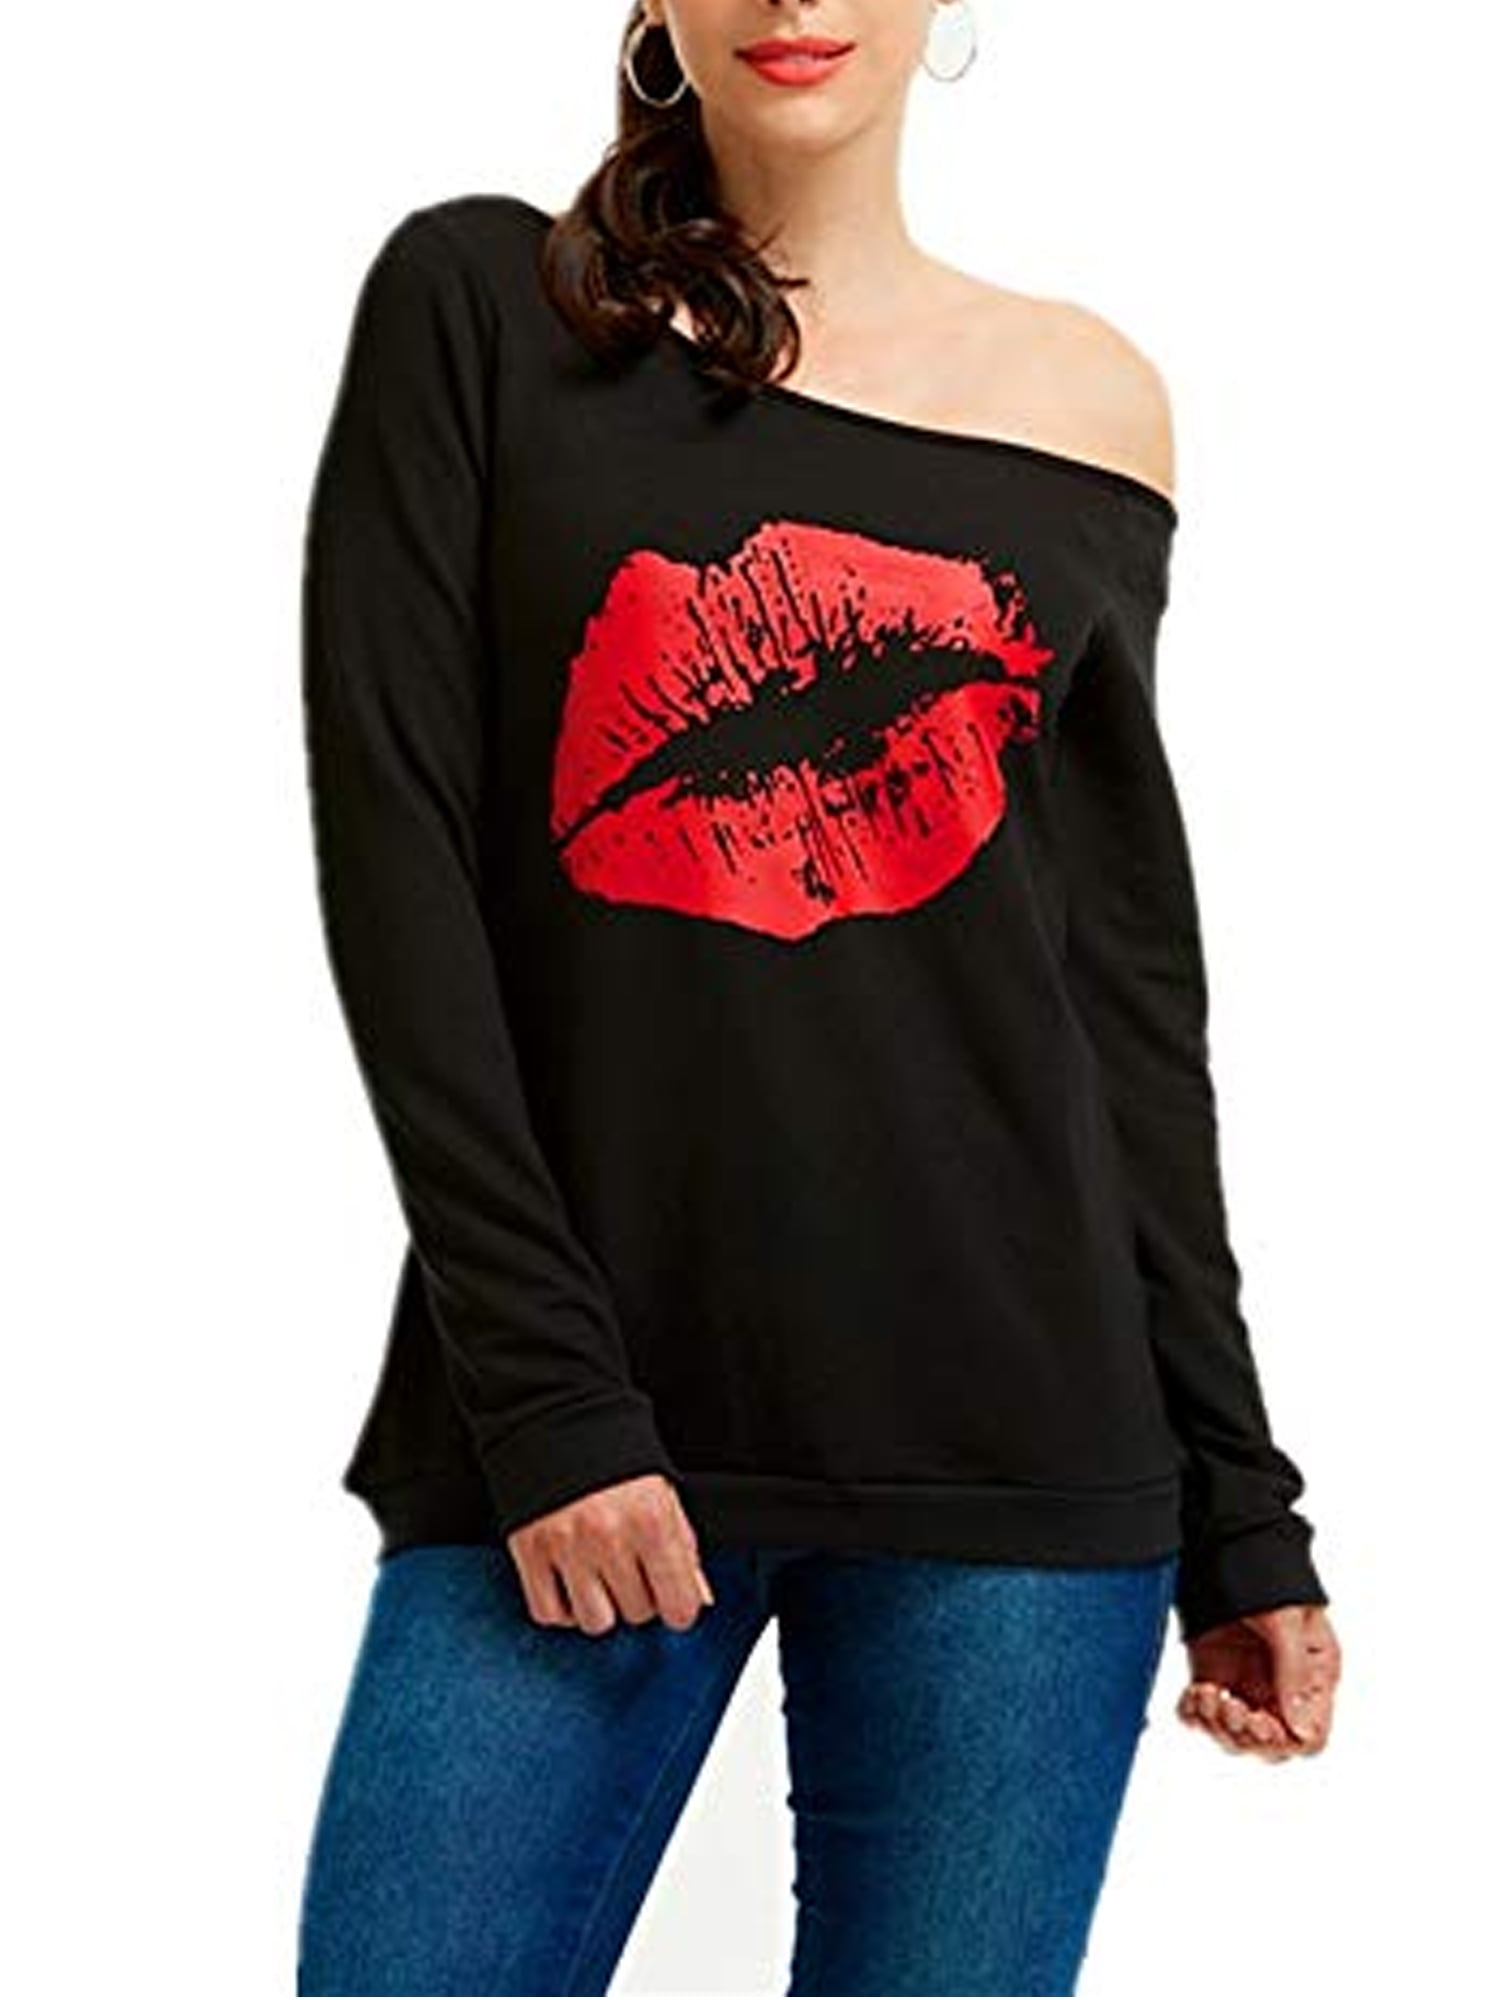 Sweatershirt Lips Print Causal Blouse Off The Shoulder Loose Pullover Plus Size Tops,Londony❤ Women Short Print T-Shirt 